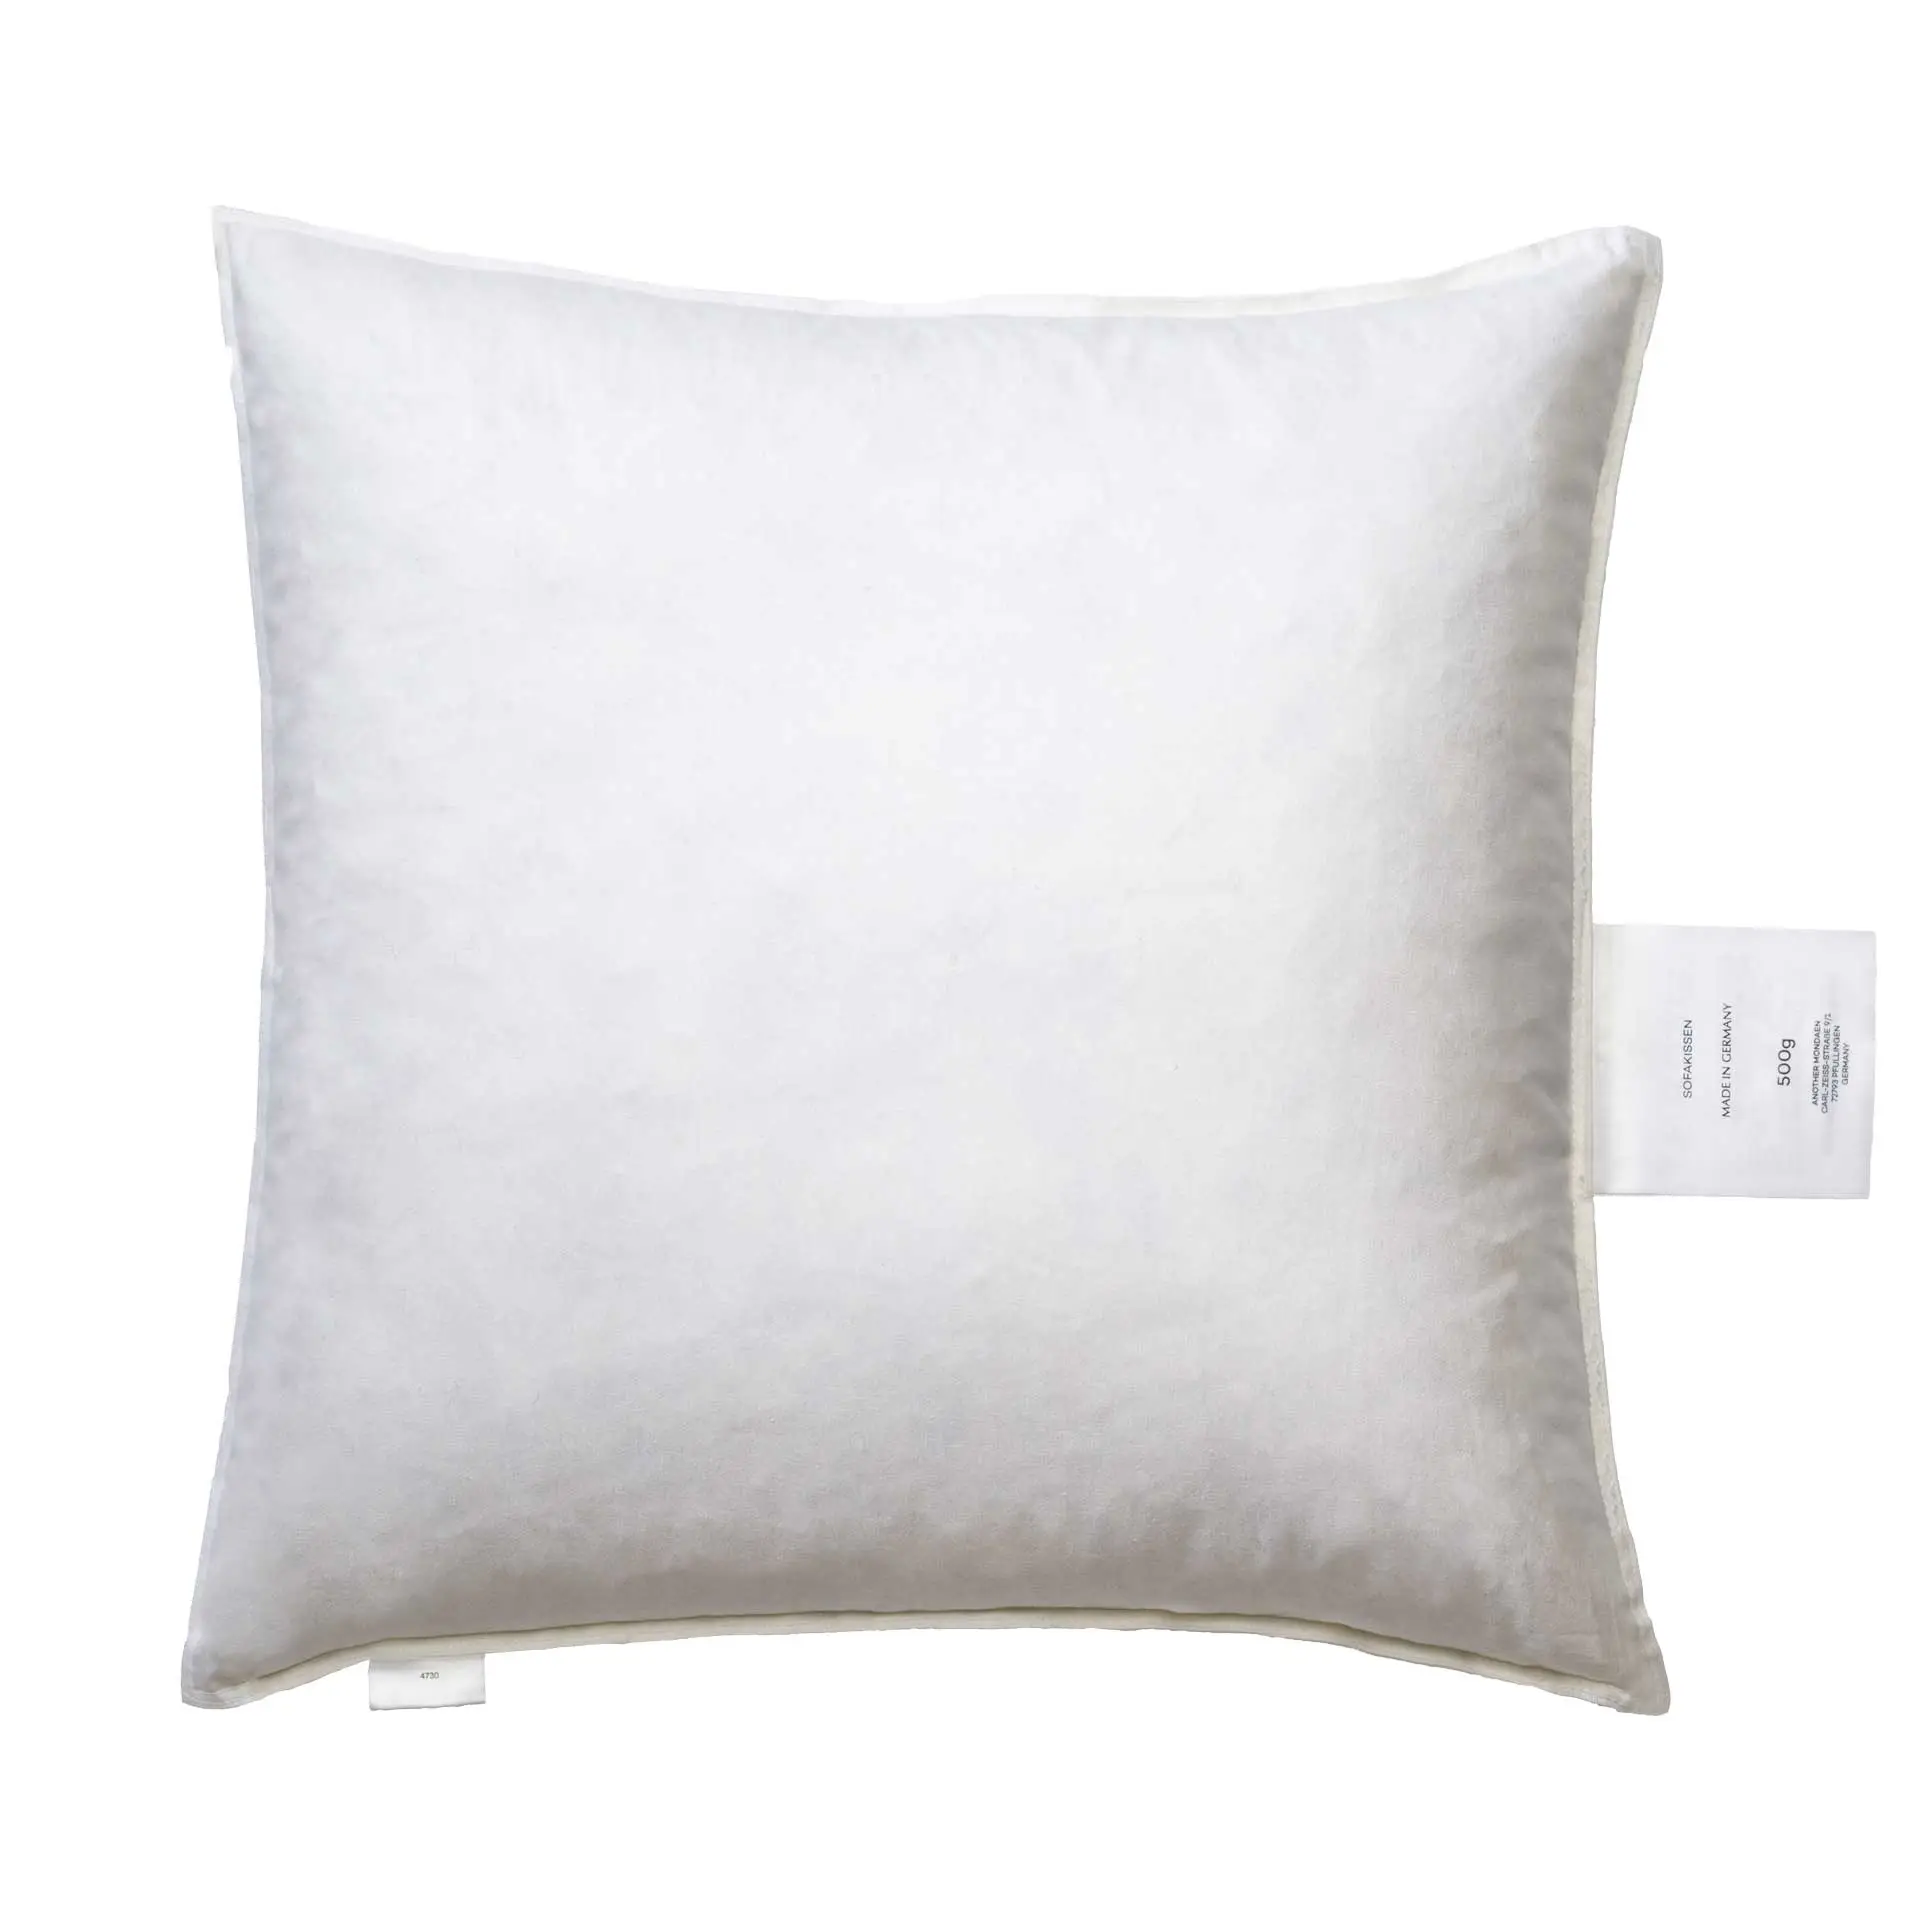 Pillow-Inserts